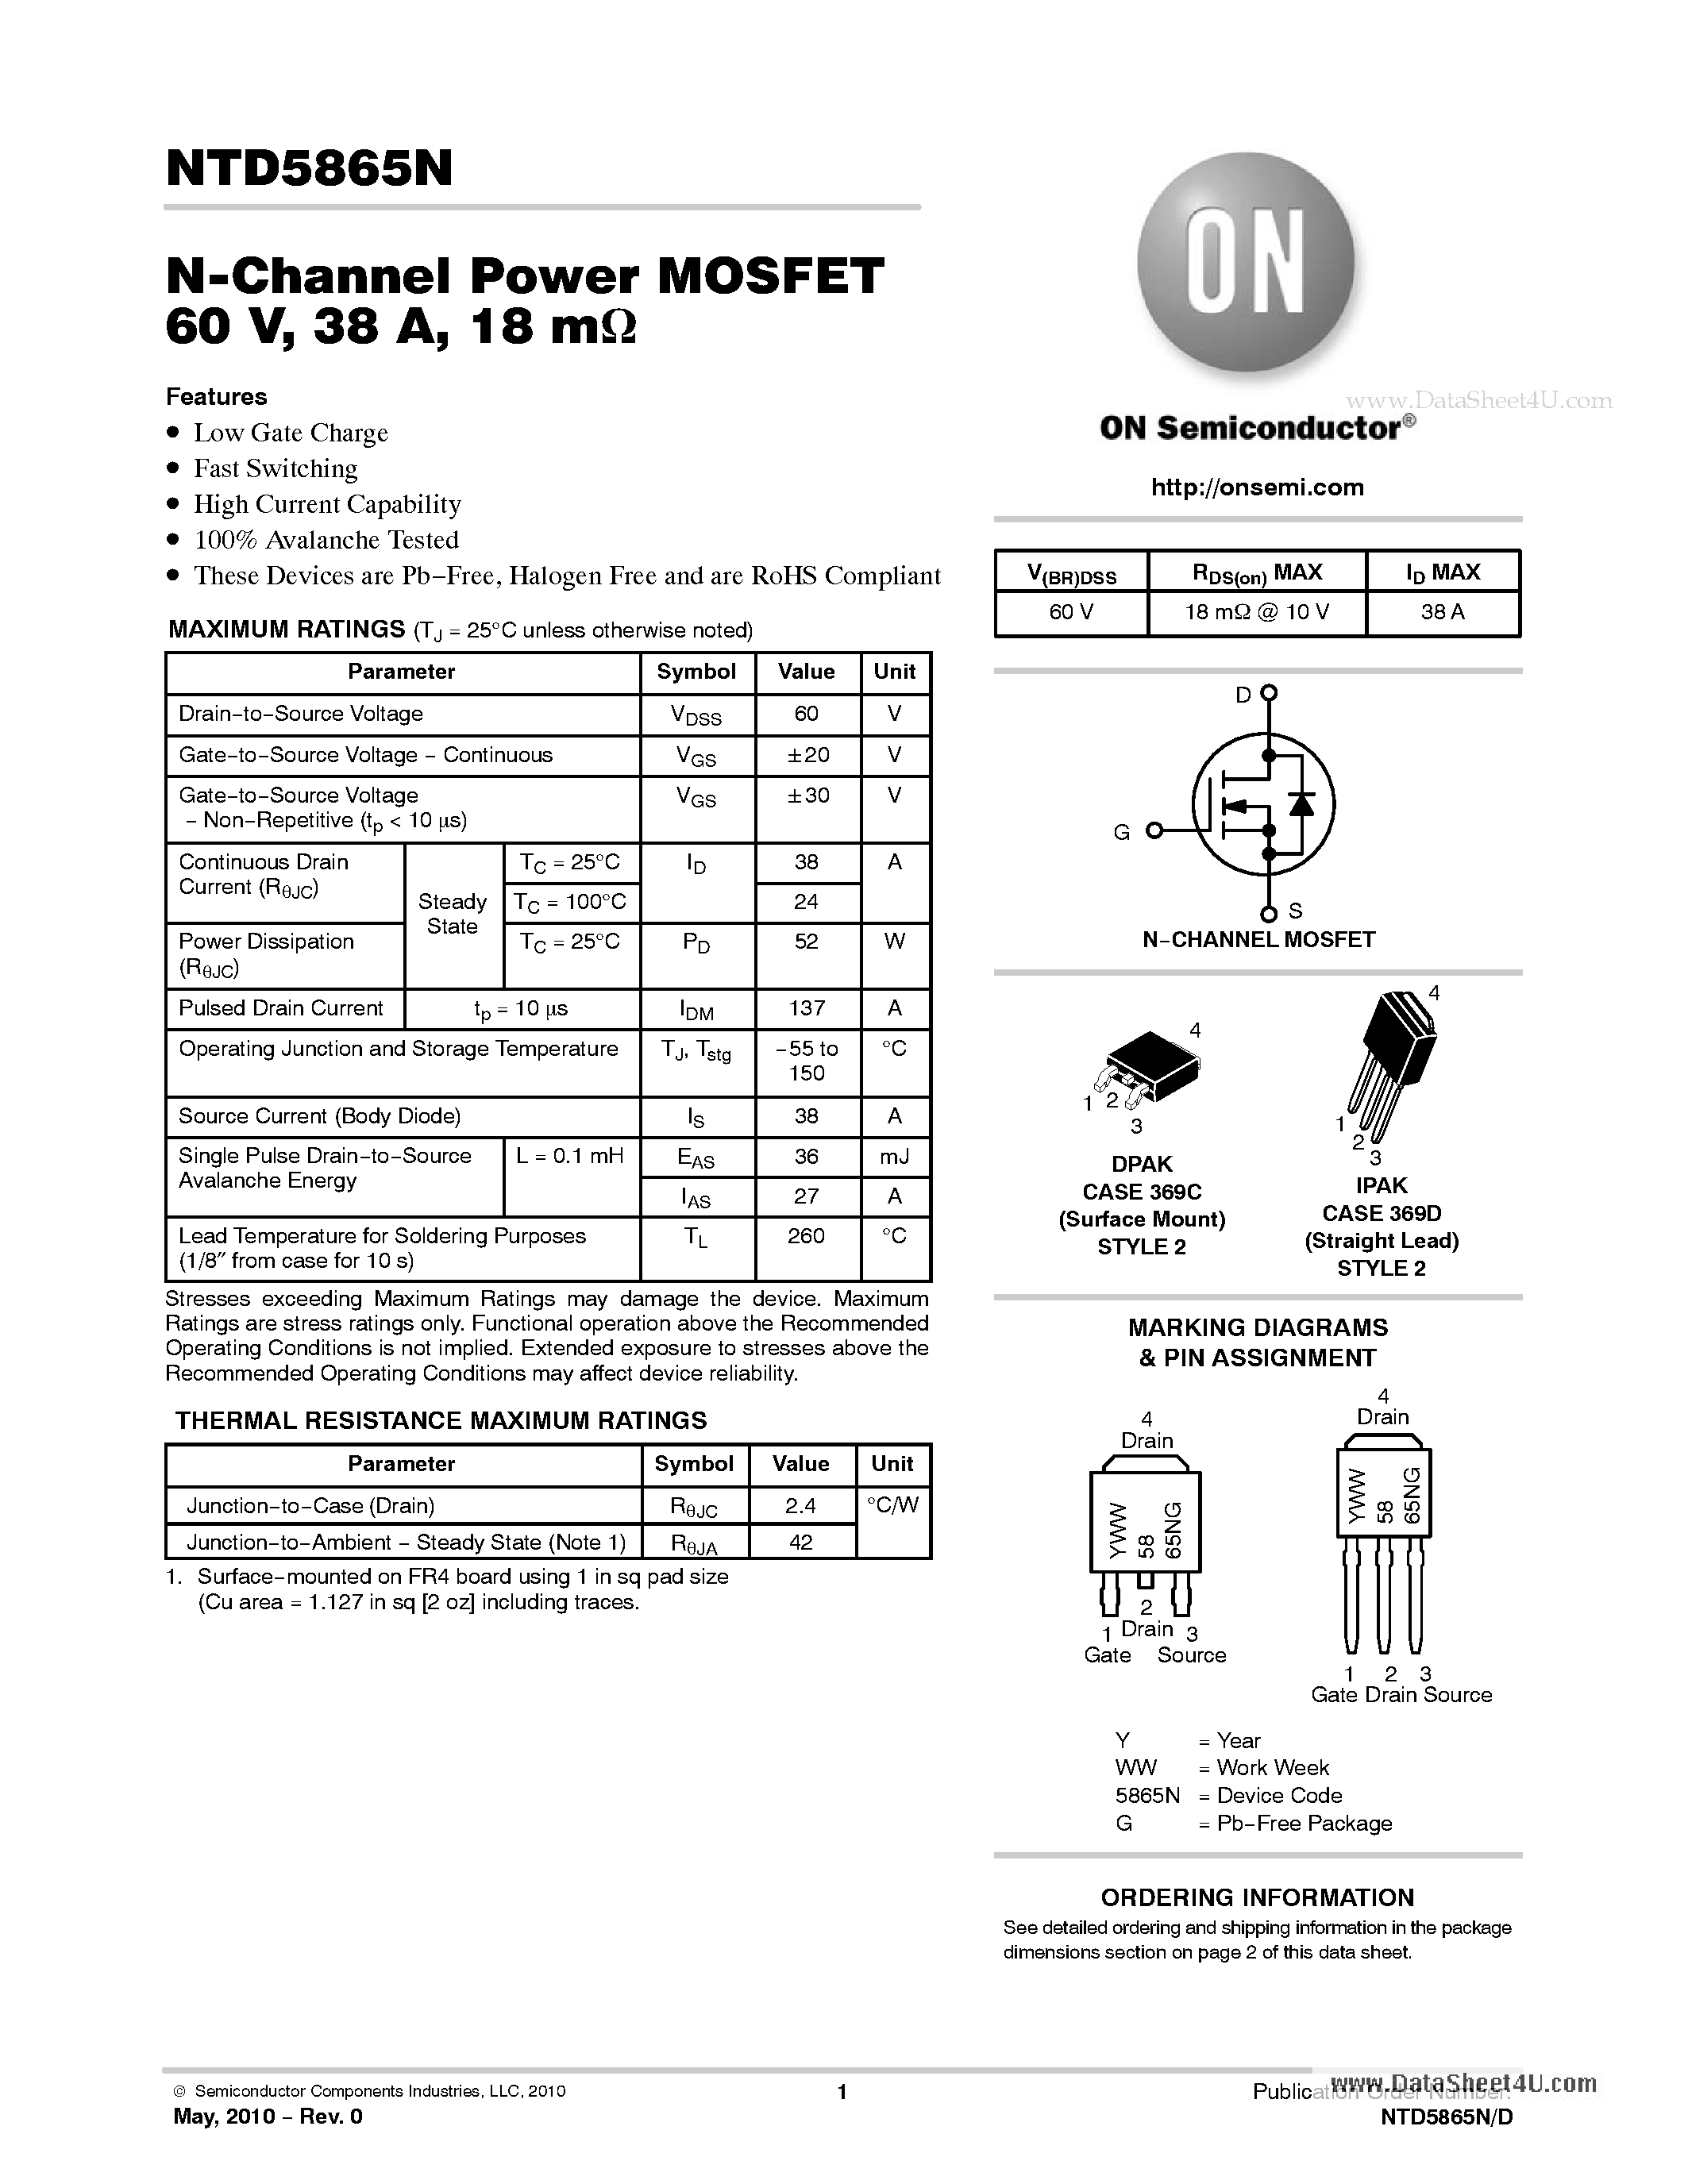 Datasheet NTD5865N - N-Channel Power MOSFET 60 V / 38 A / 18 m ome page 1